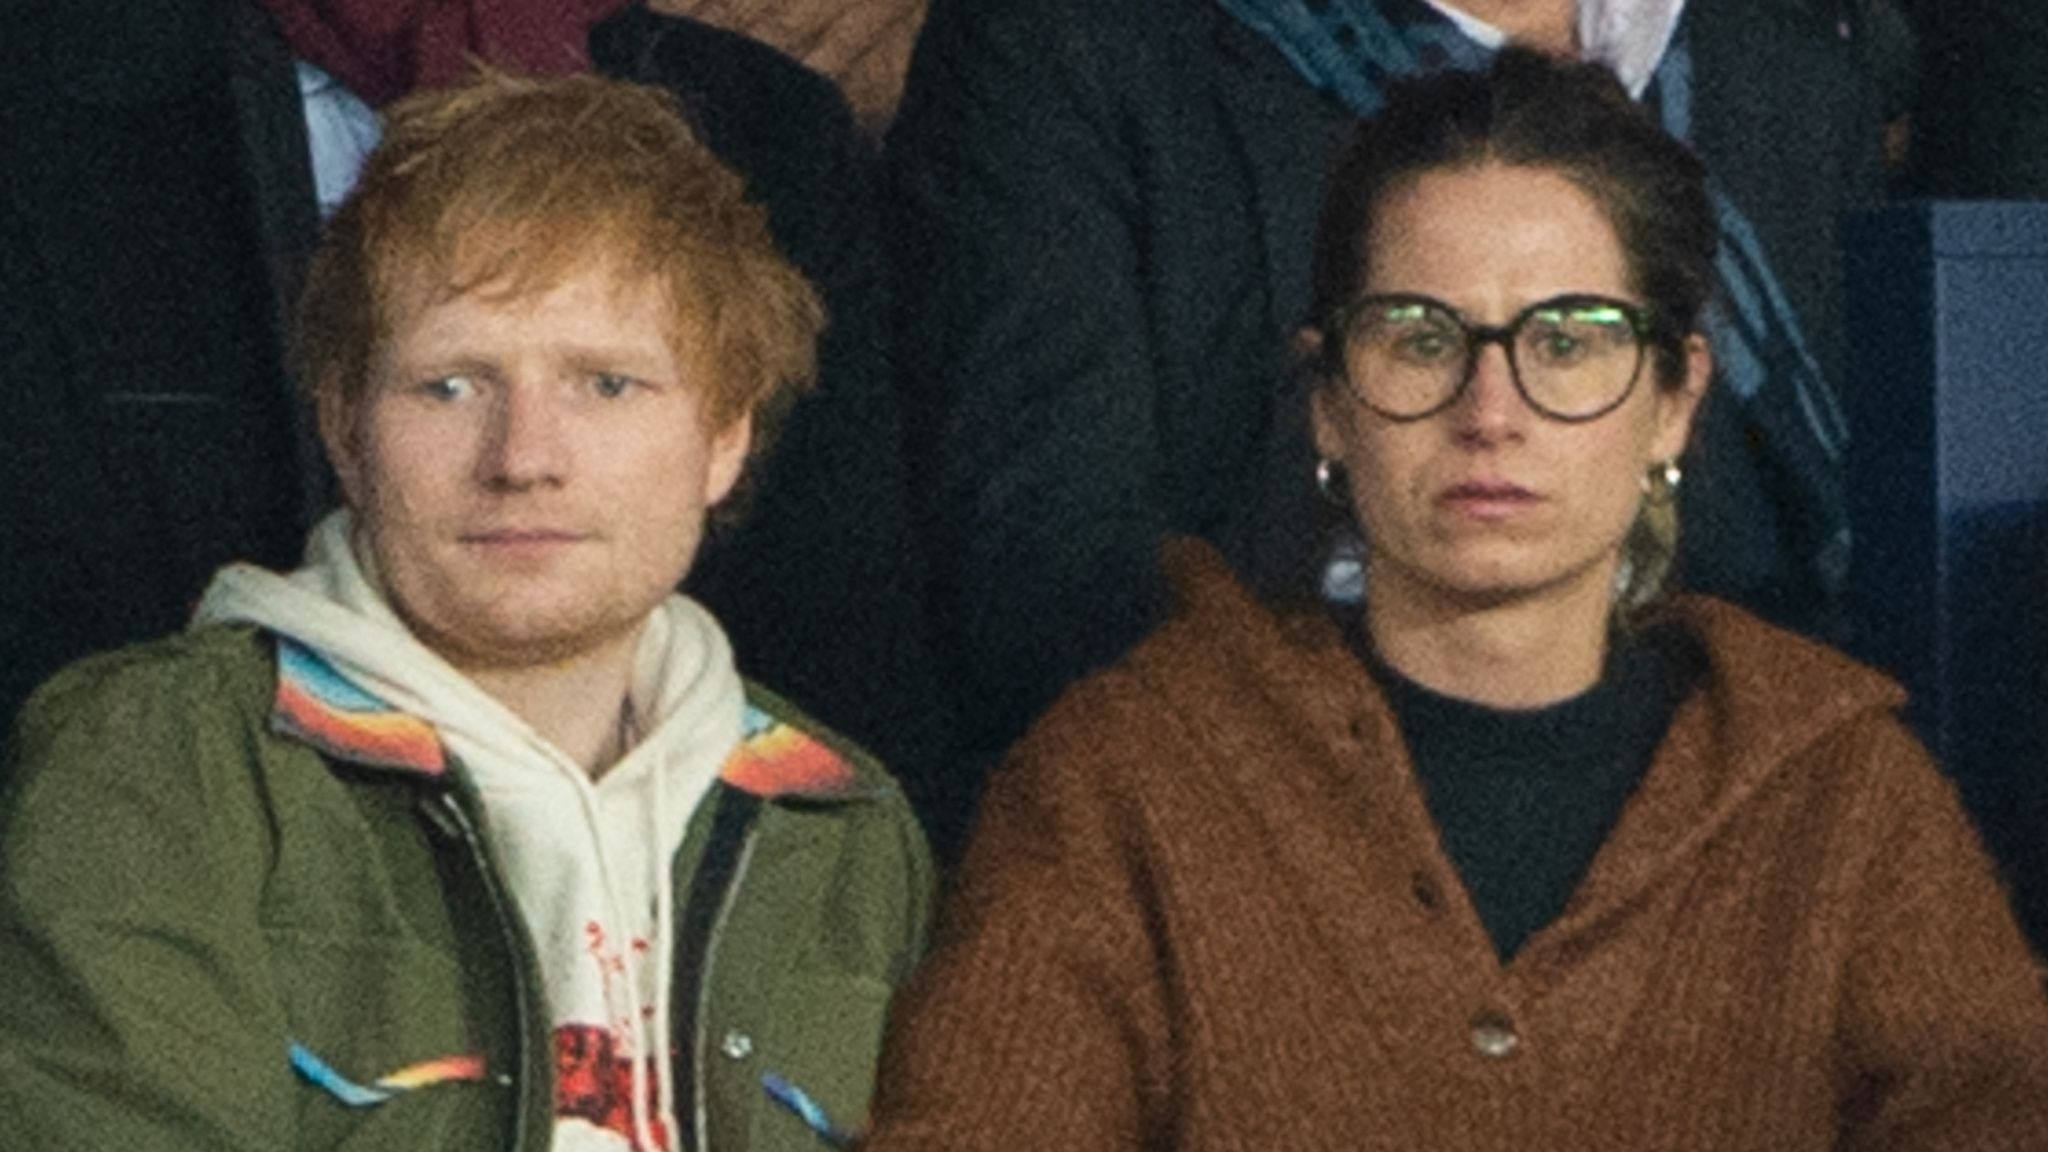 Ed Sheeran Reveals Wife Cherry Seaborn Was Diagnosed With Tumour While Pregnant As He Confirms